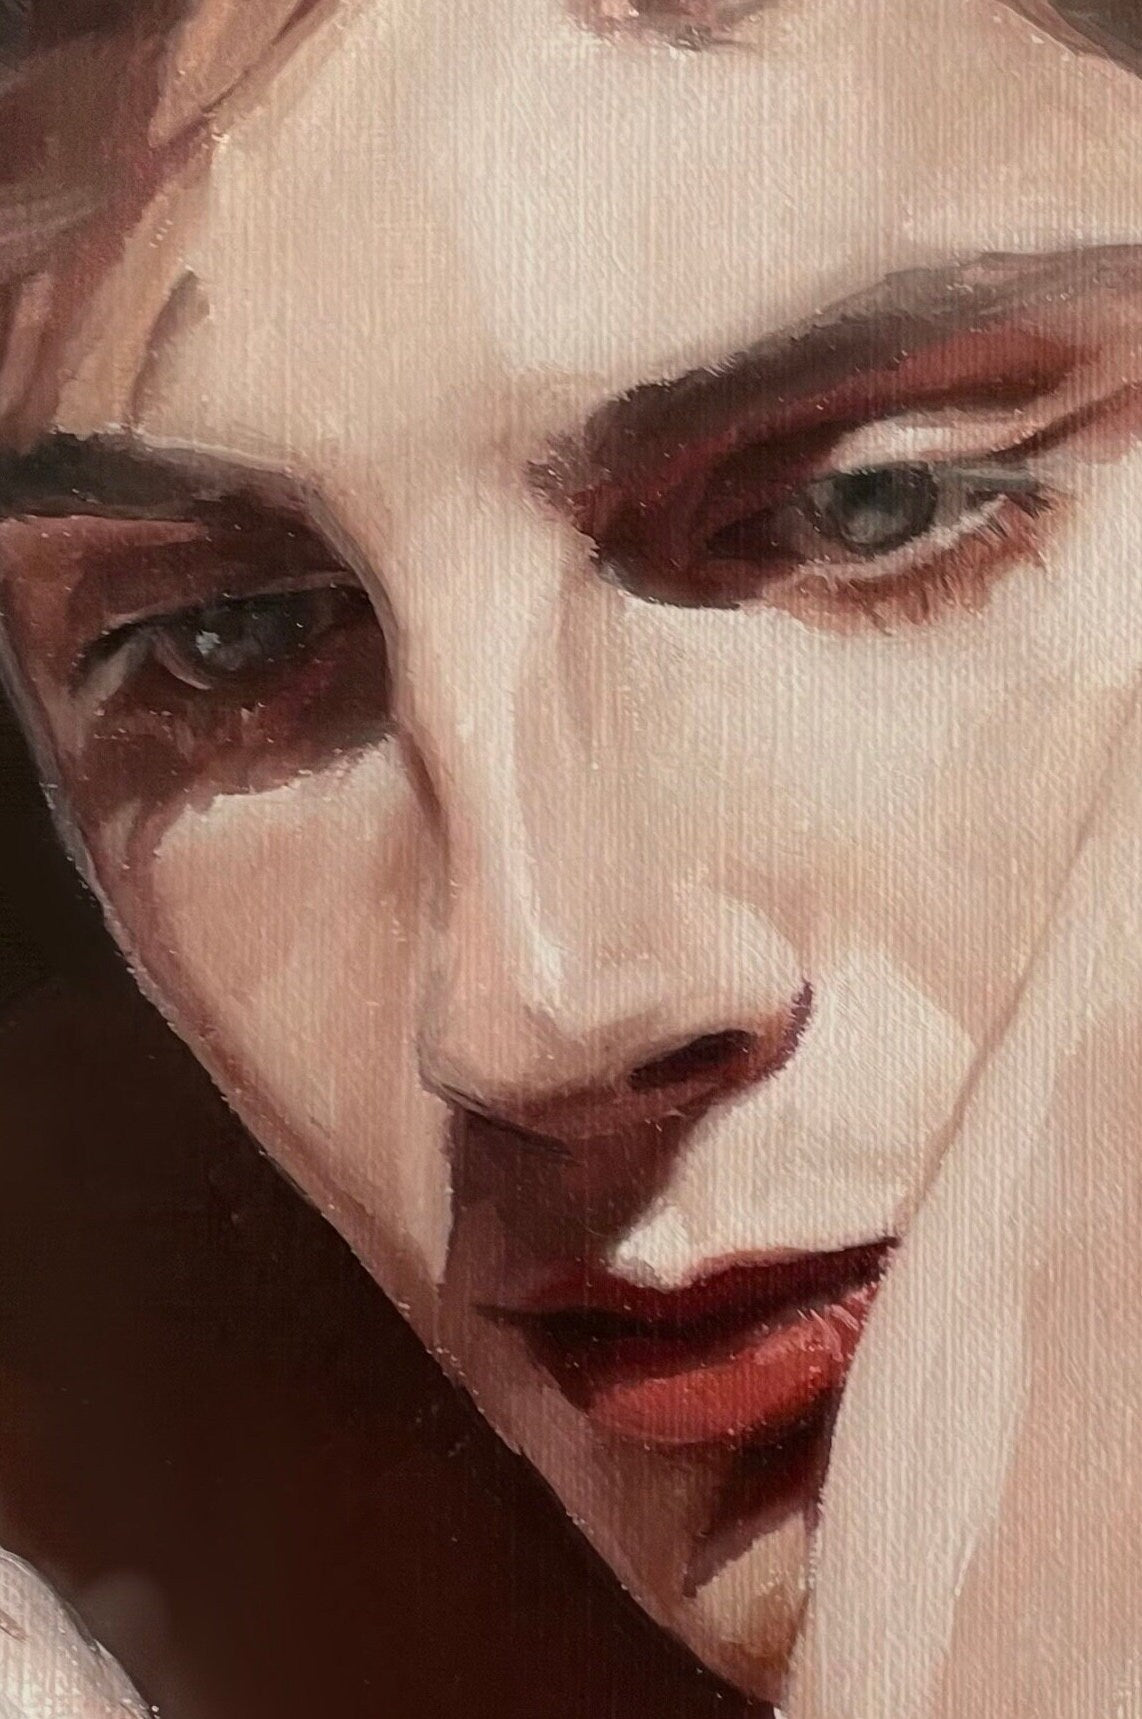 Timothee Chalamet Call me by your name Art Print from Original Oil painting